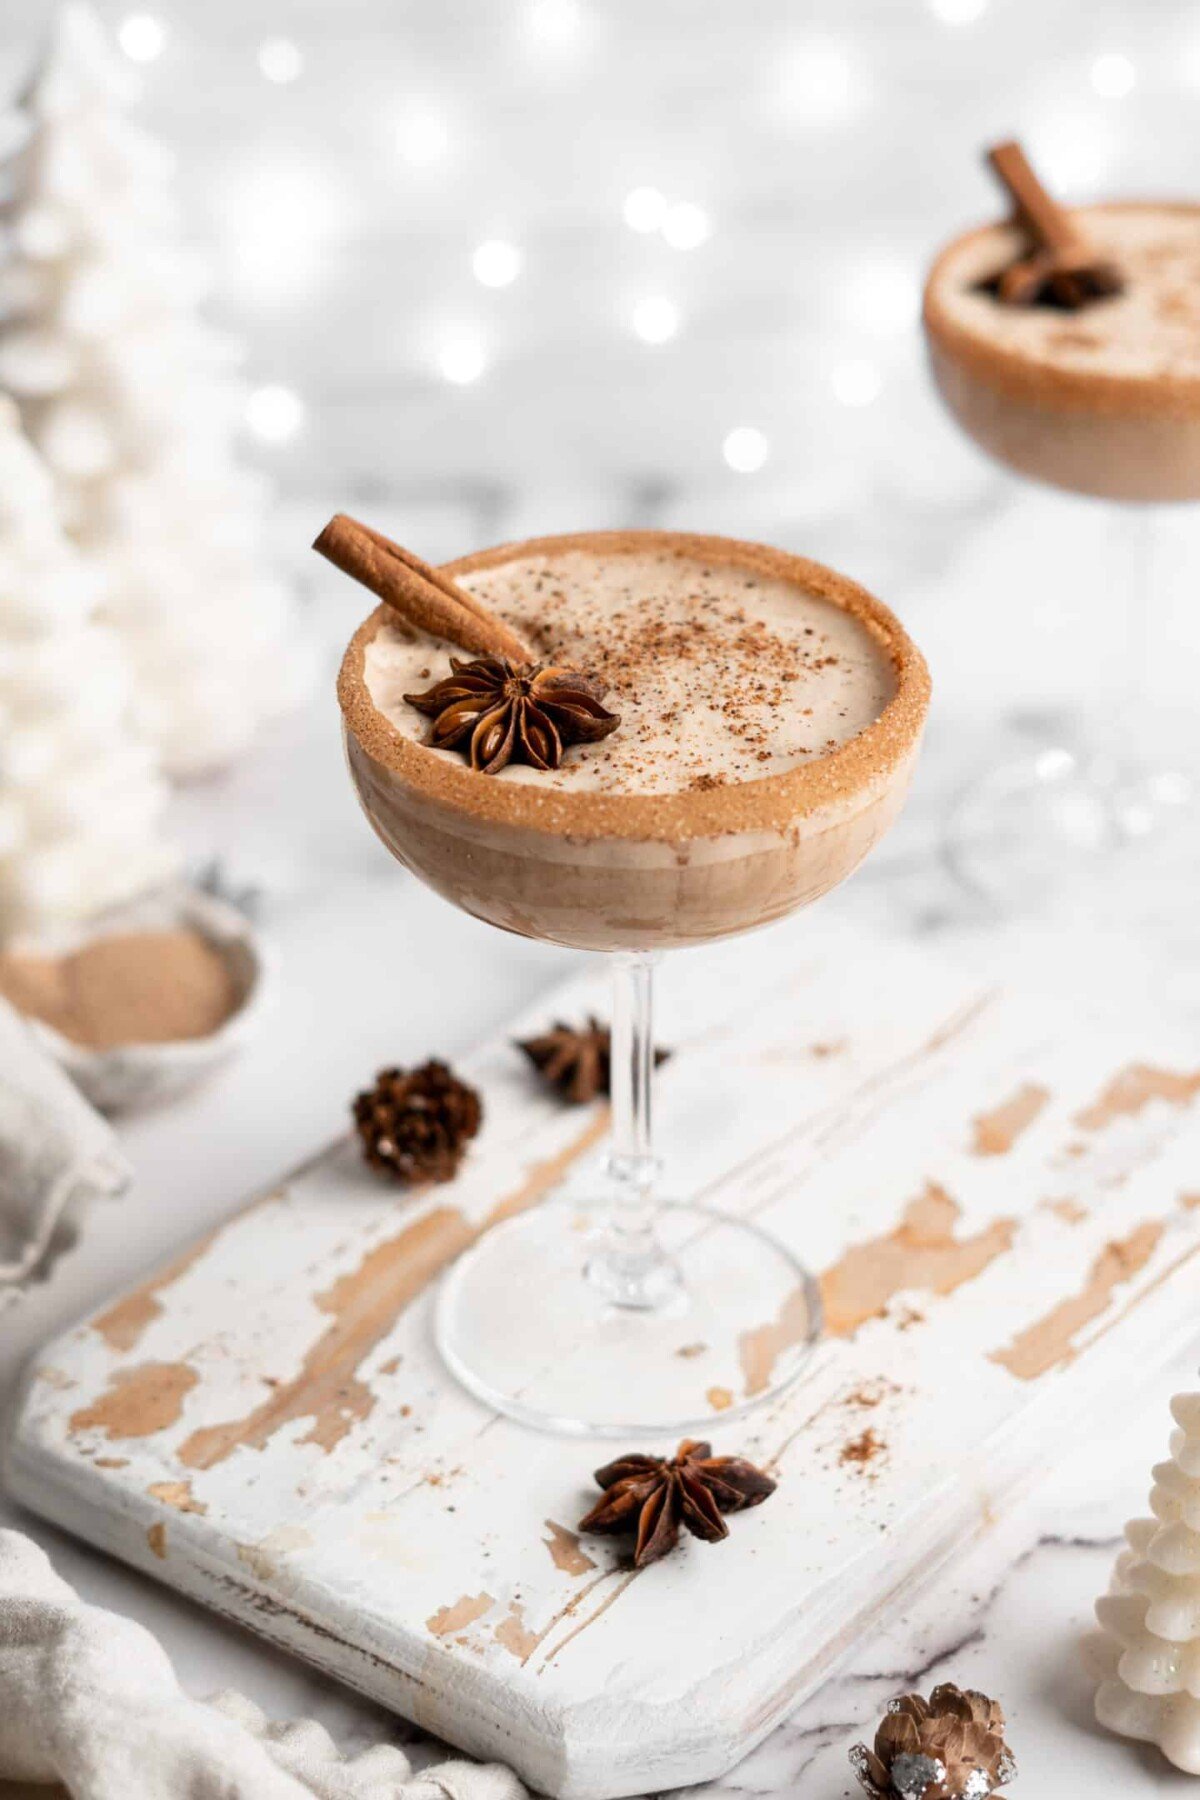 A cocktail glass filled with vegan eggnog, garnished with a cinnamon stick, ground cinnamon, and a star anise pod, with a cinnamon sugar rim, with Christmas lights and another glass of eggnog in the back